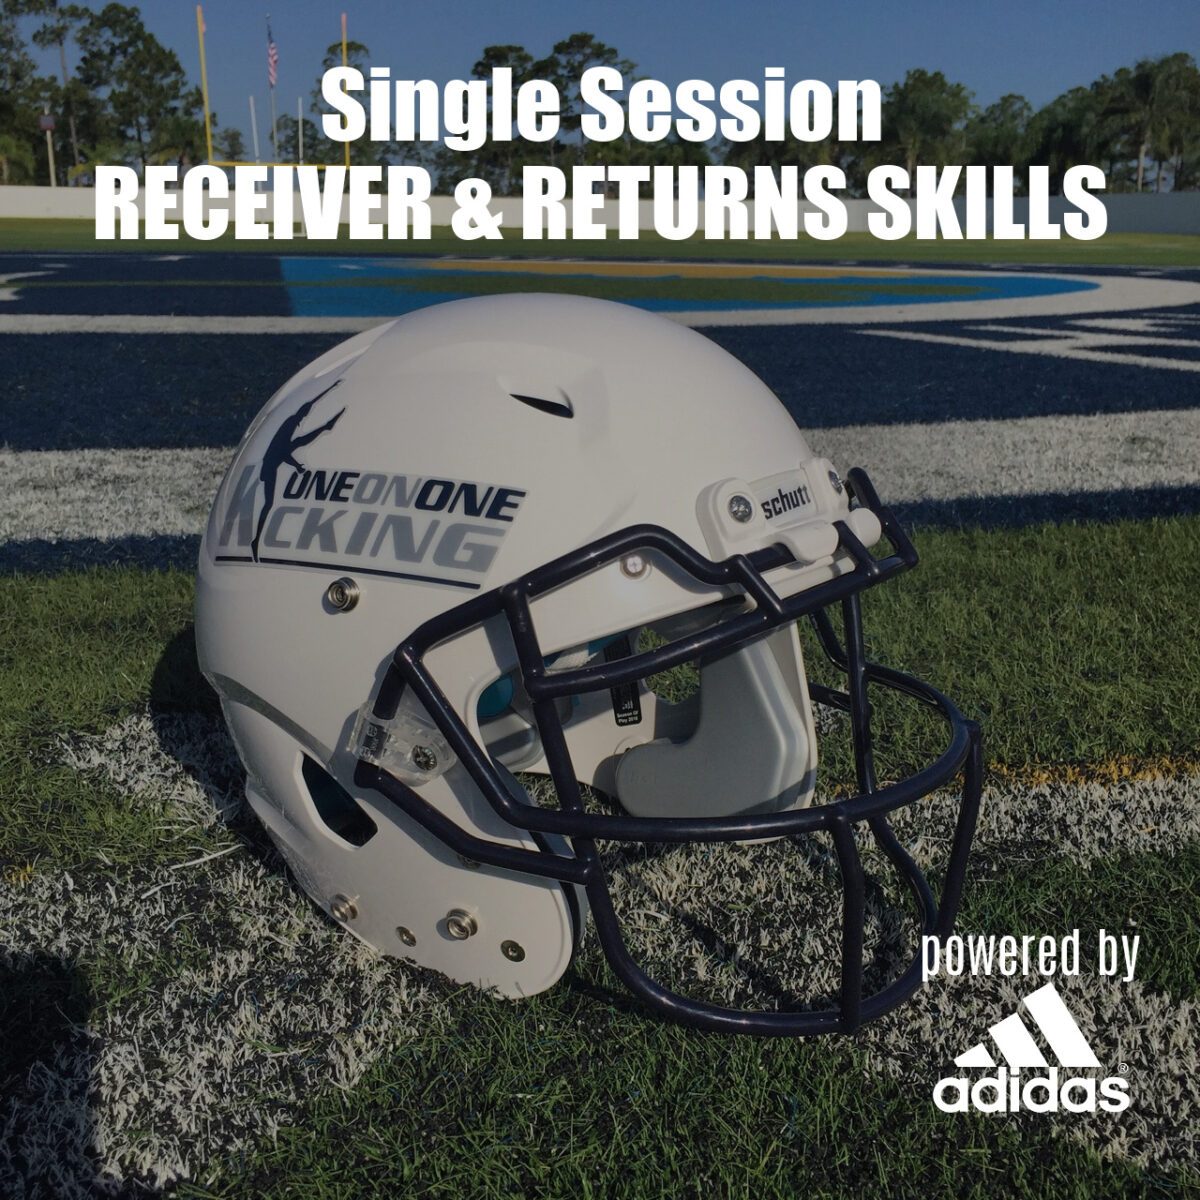 Single session receiver & punt and kick returns skills training down payment image